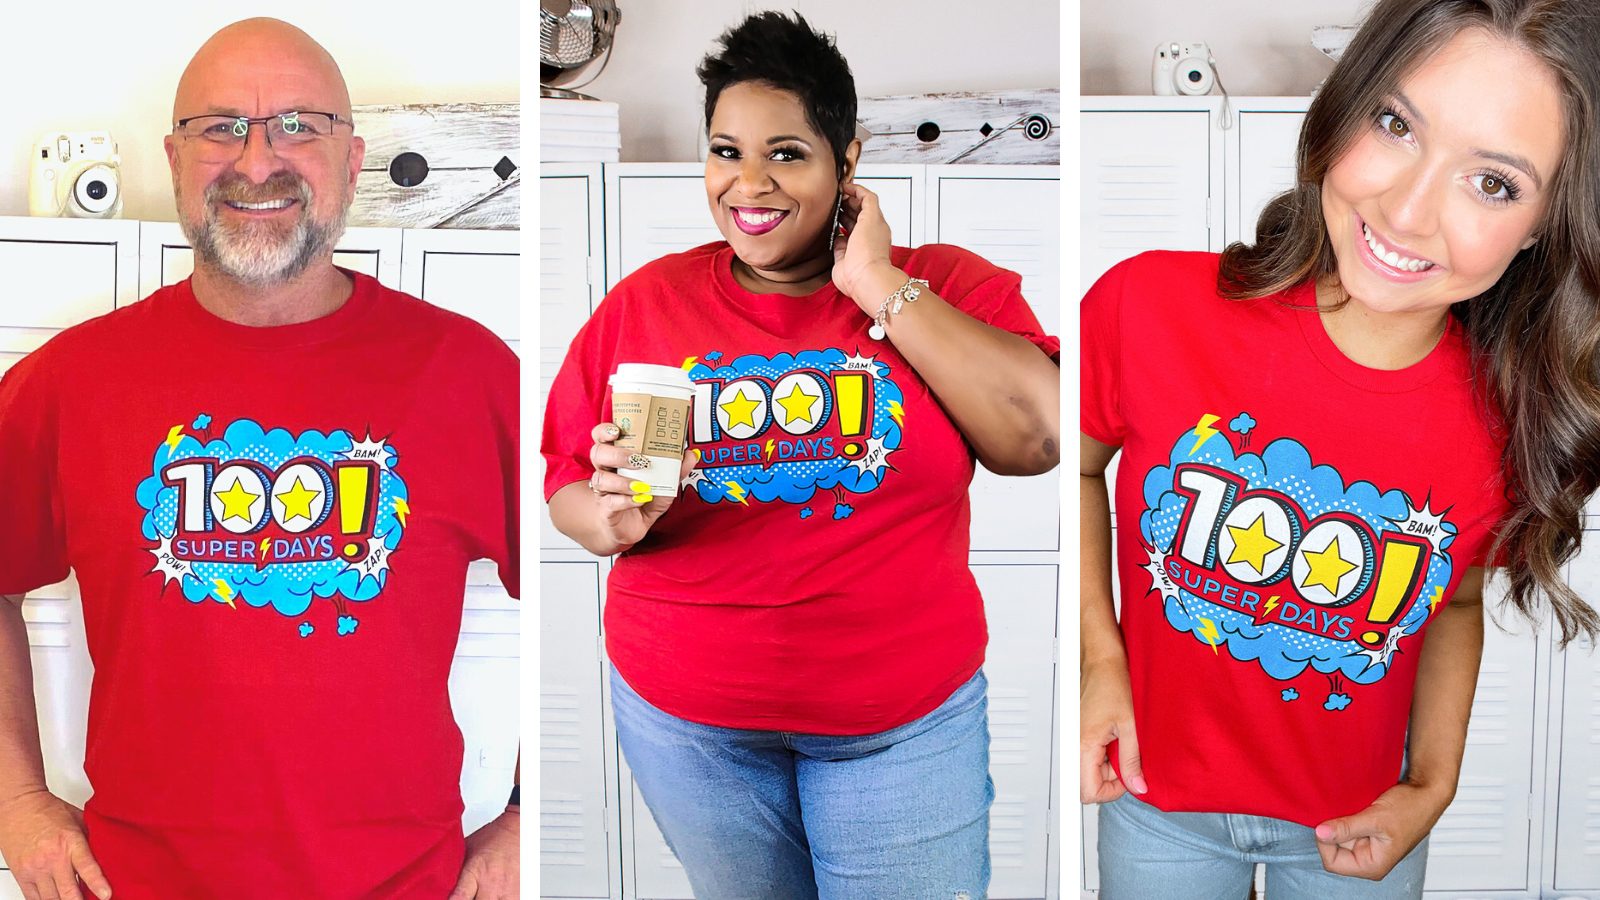 Photos of three people wearing a 100 days of school T-shirt